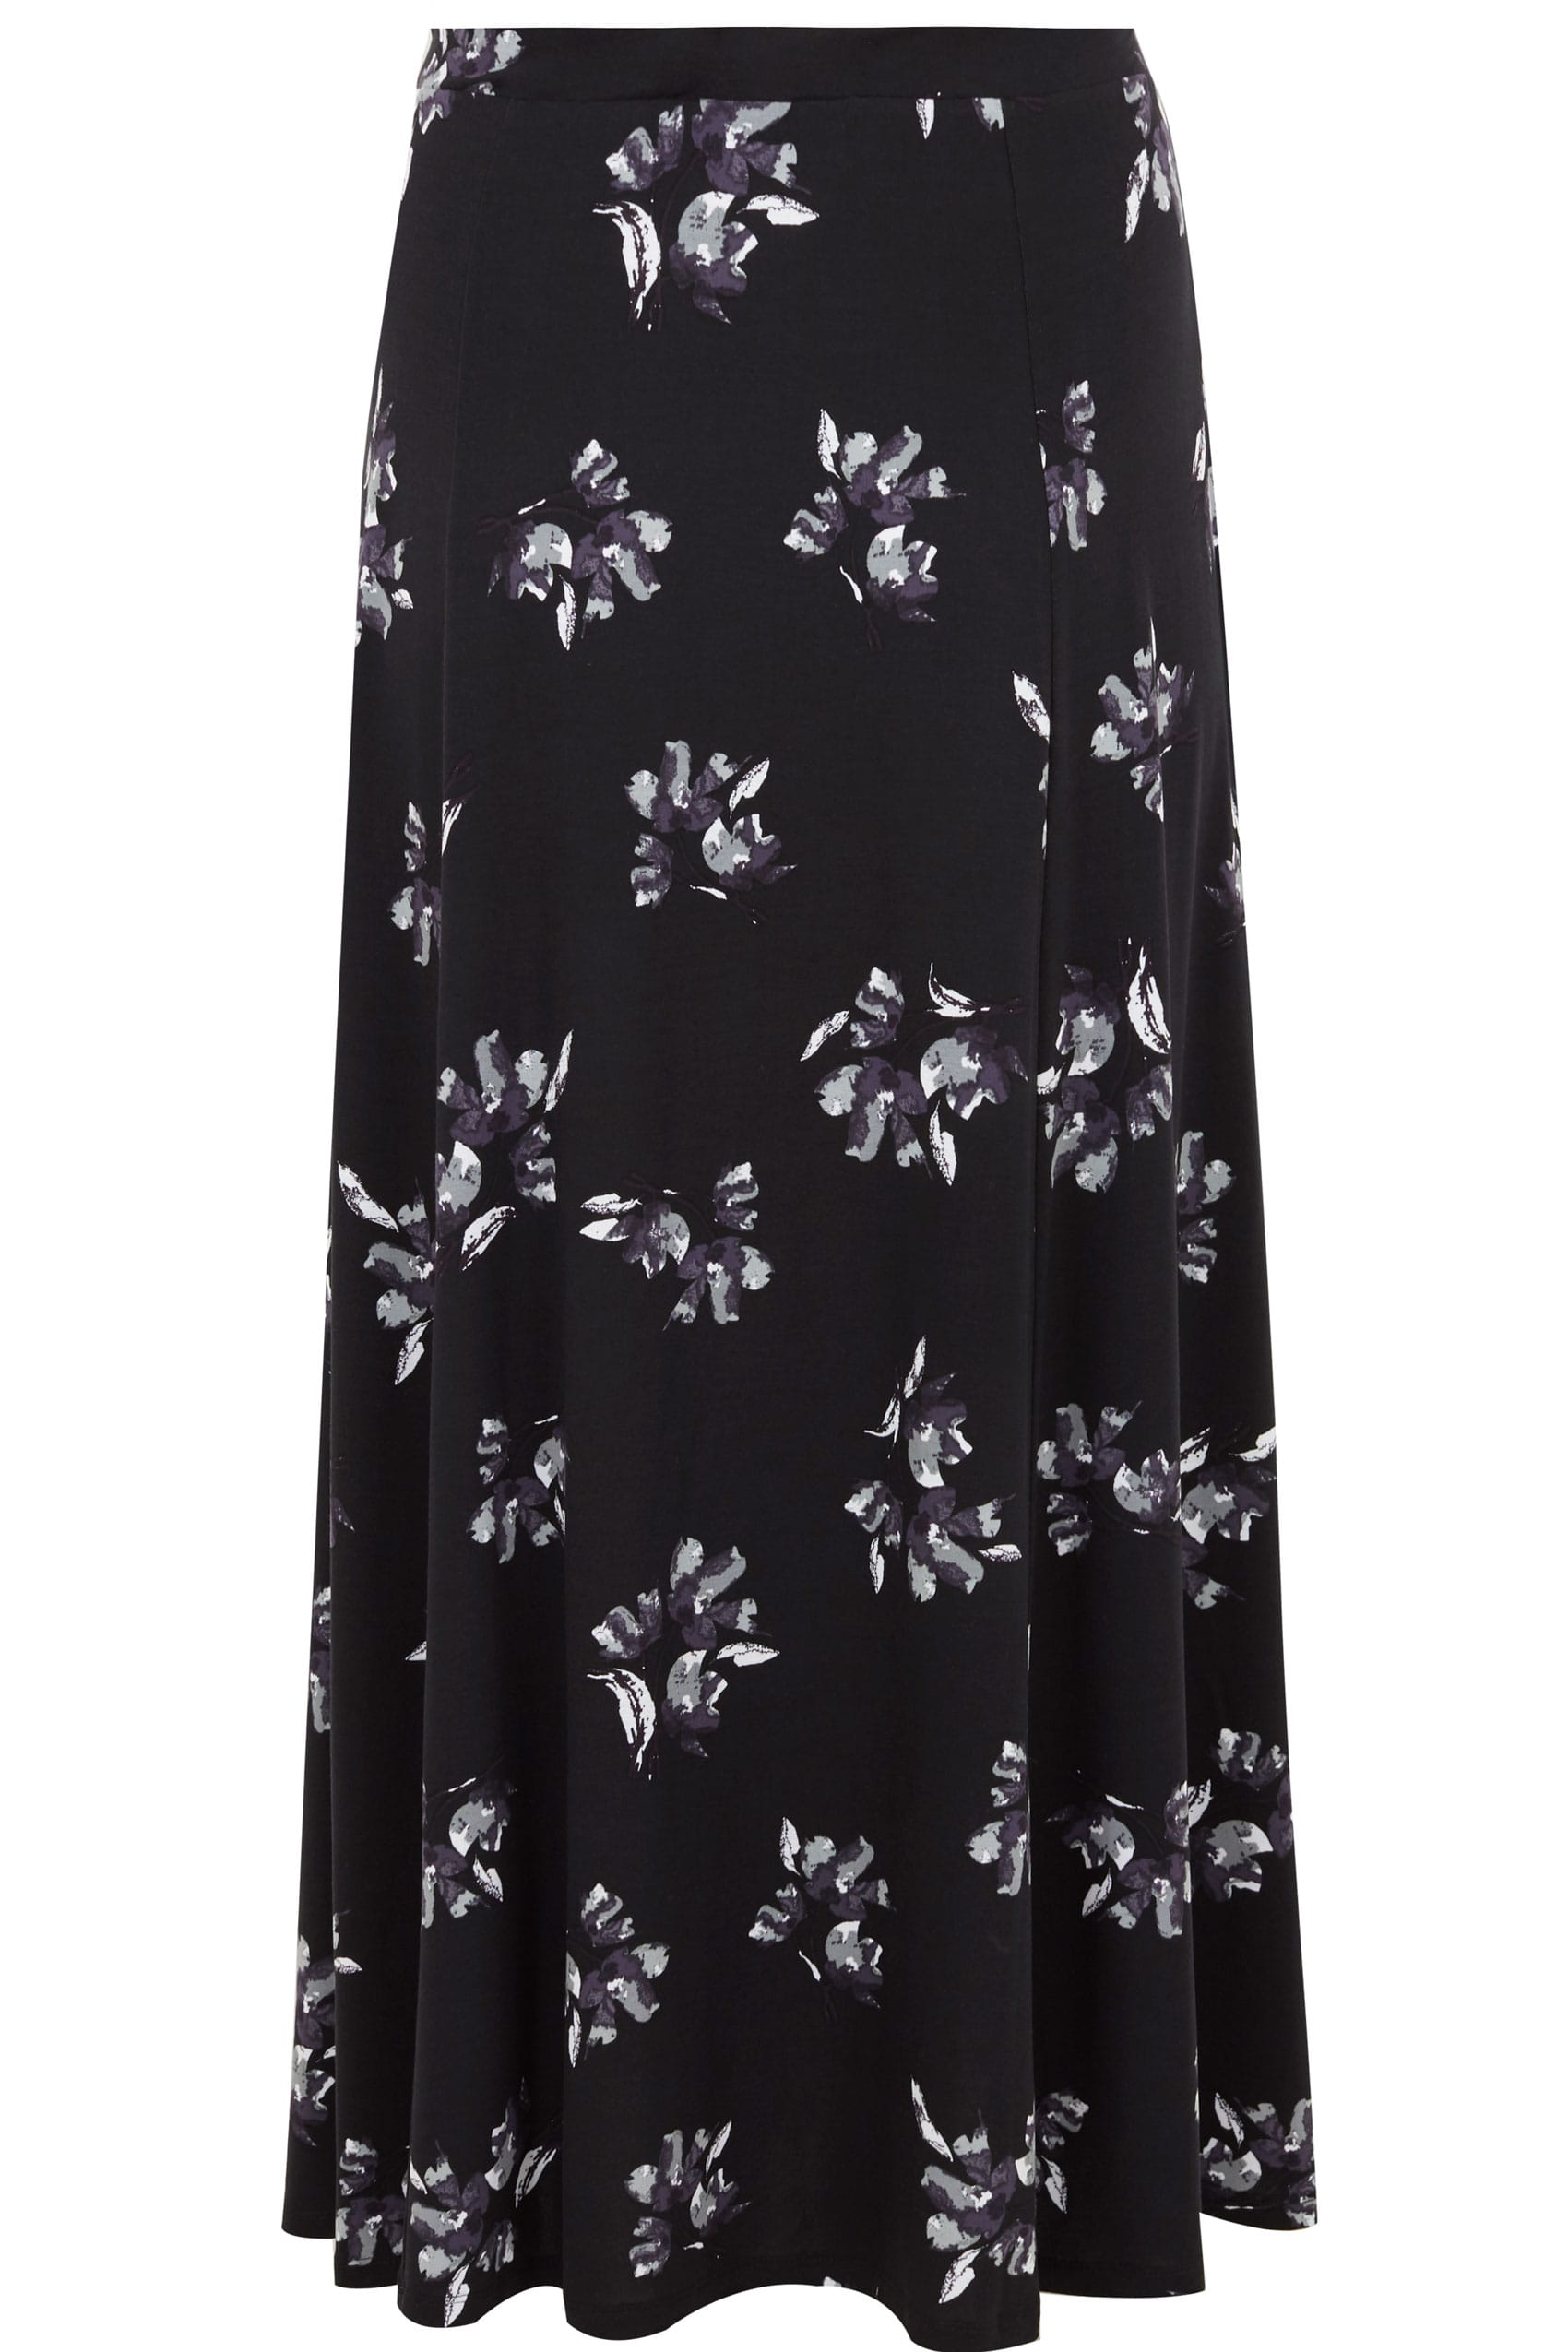 Black & Multi Floral Maxi Skirt With Pockets, Plus size 16 to 36 ...